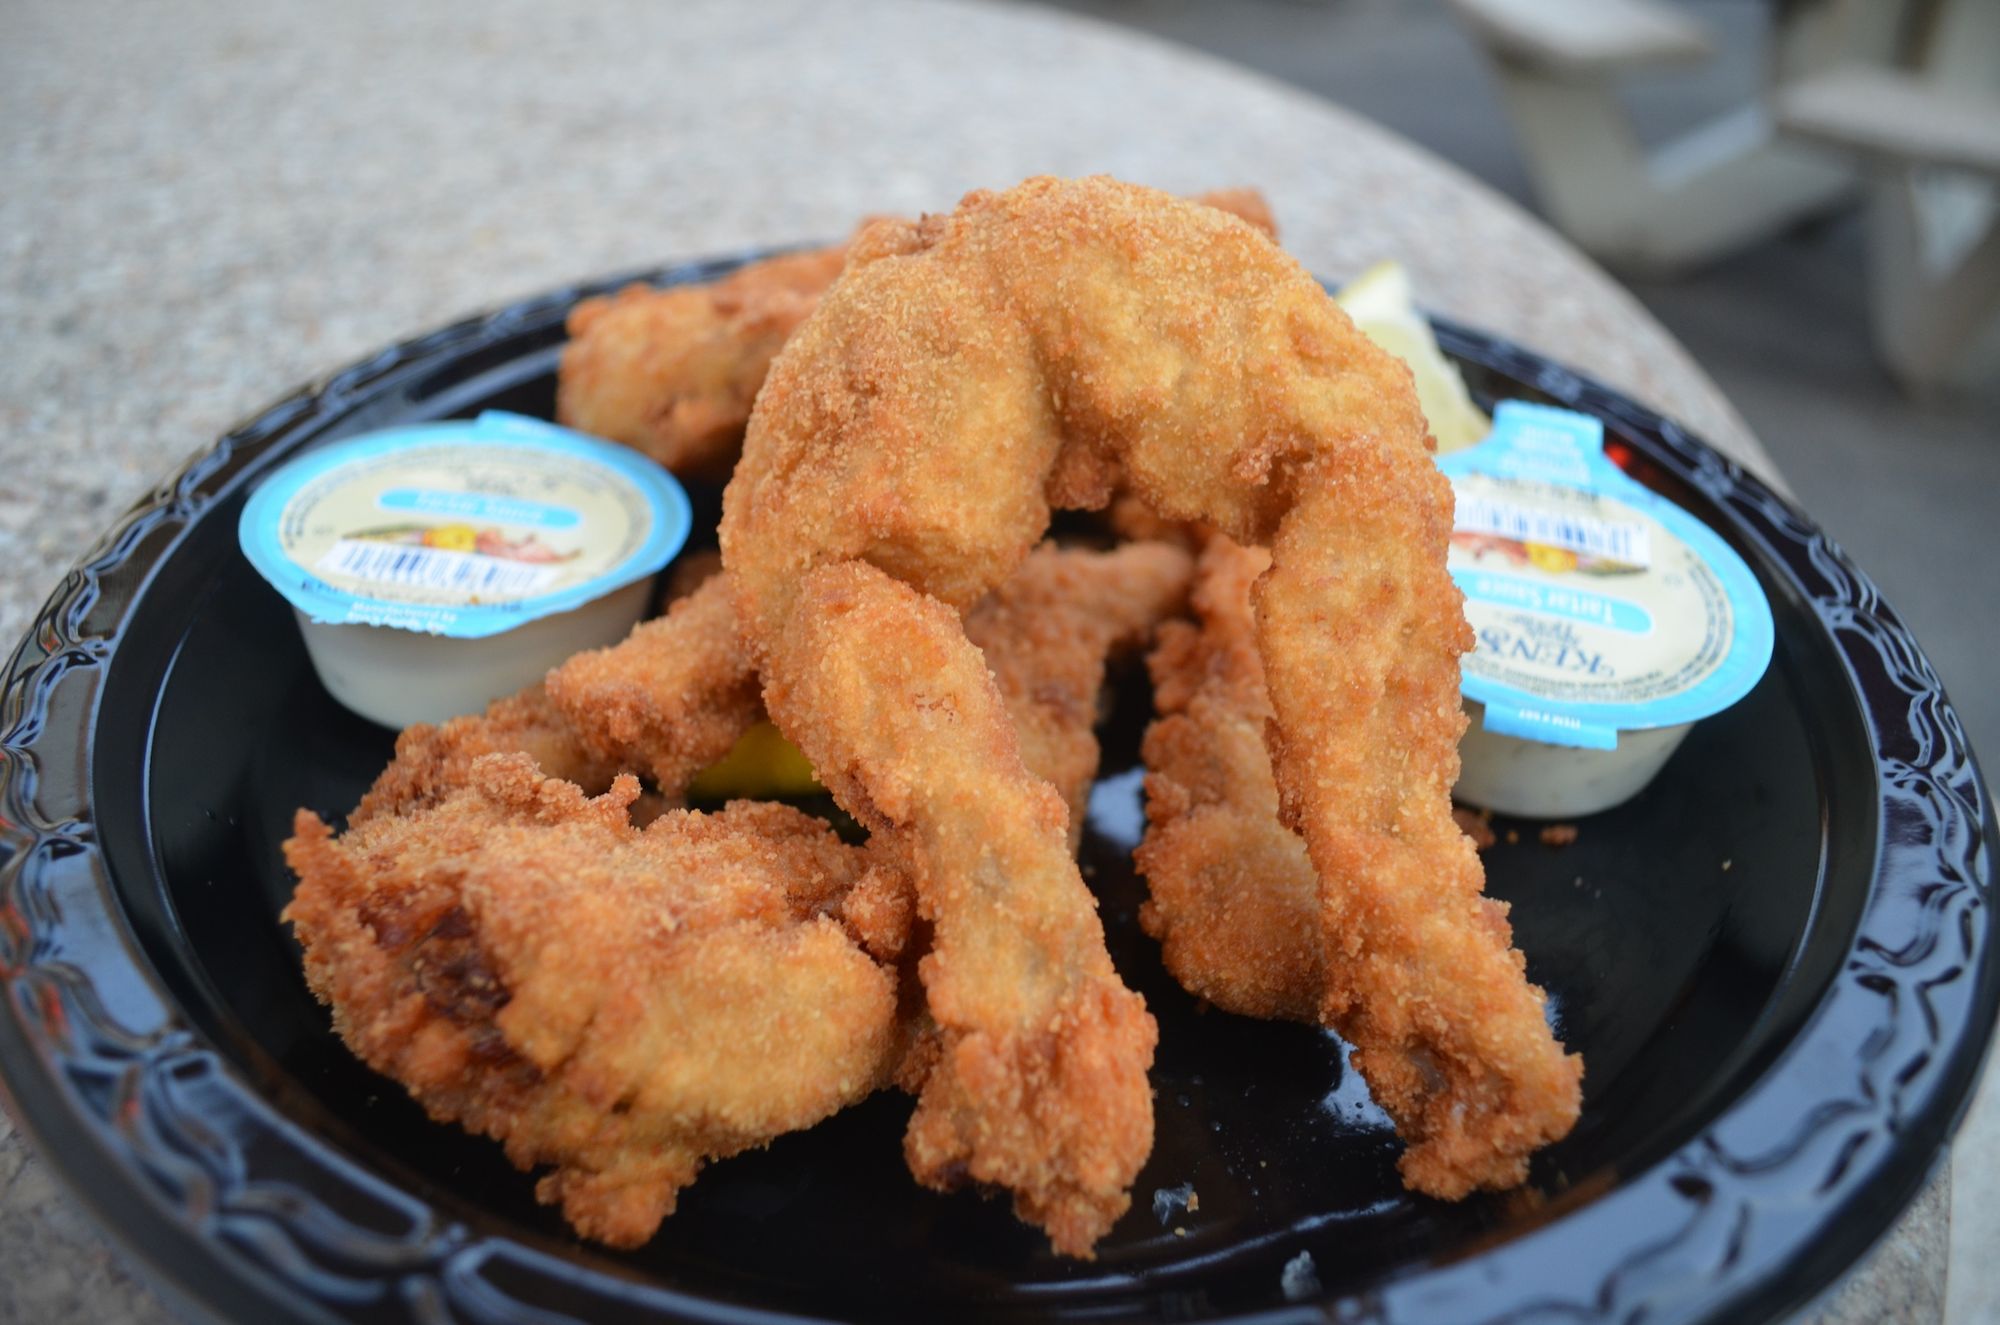 Coney Island Oddities: Fried Frog Legs At Nathan’s